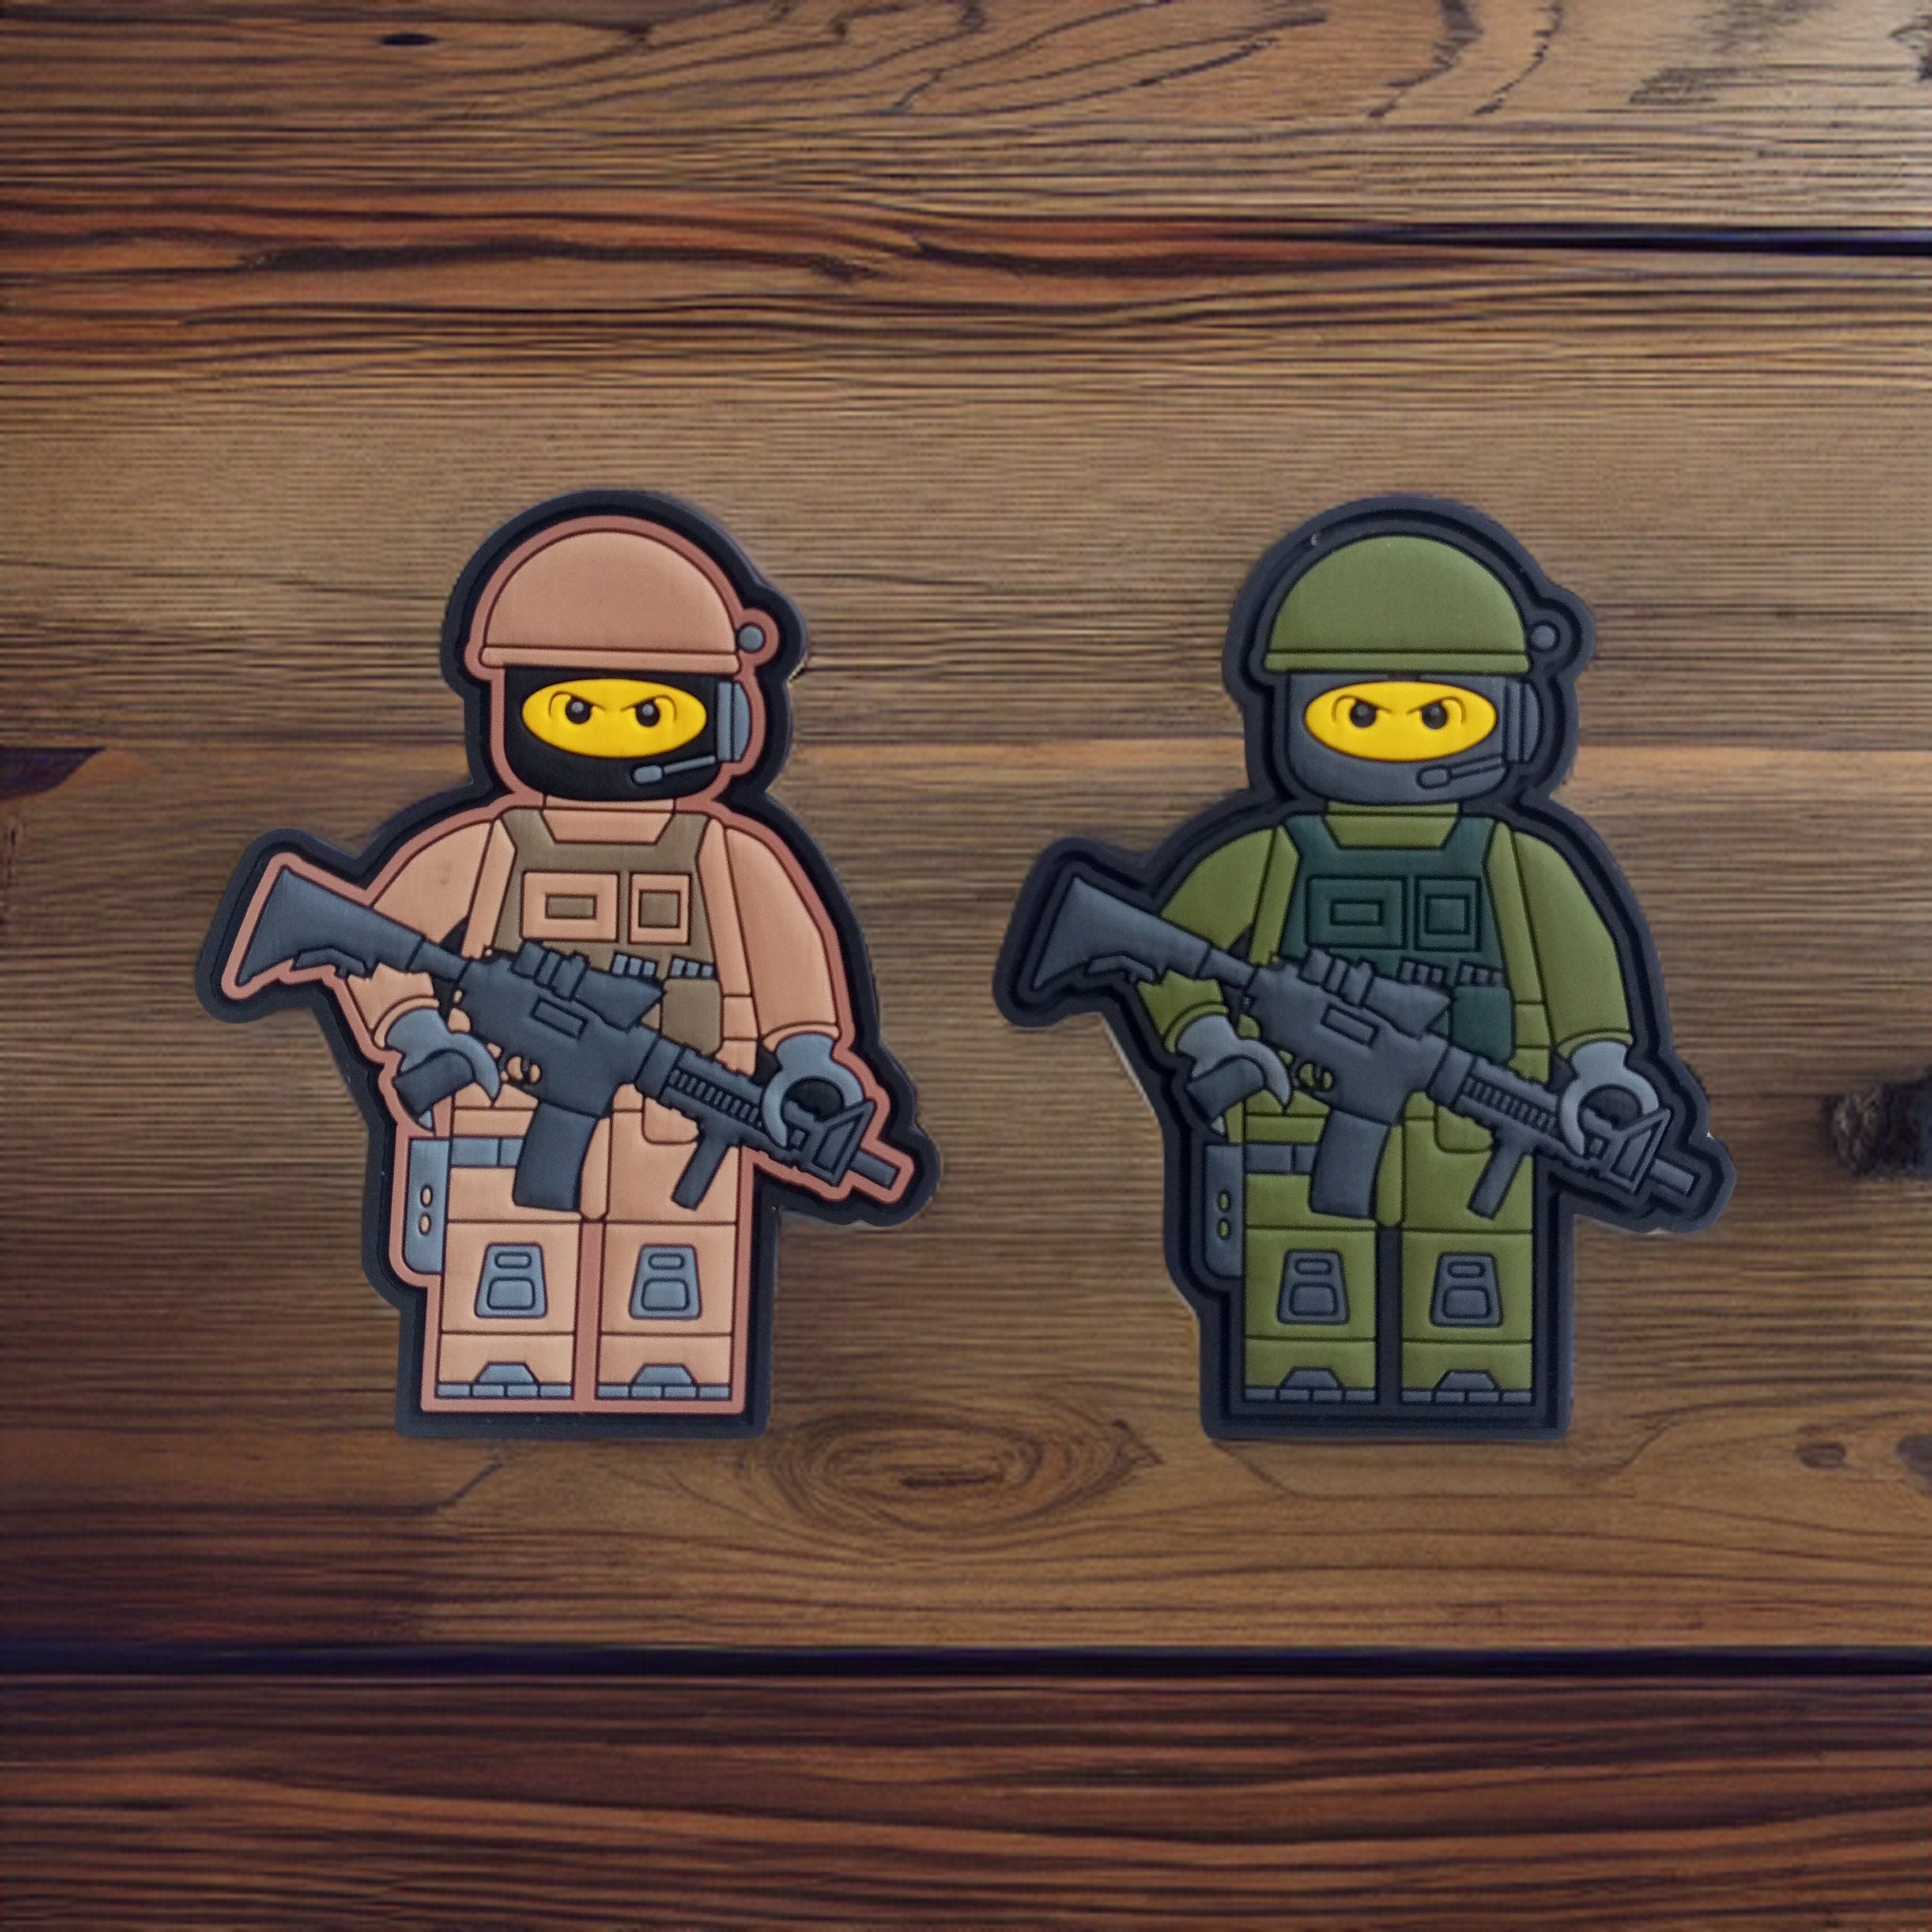 How to Build a Morale Patch Wall - 3 Gun Kenzie